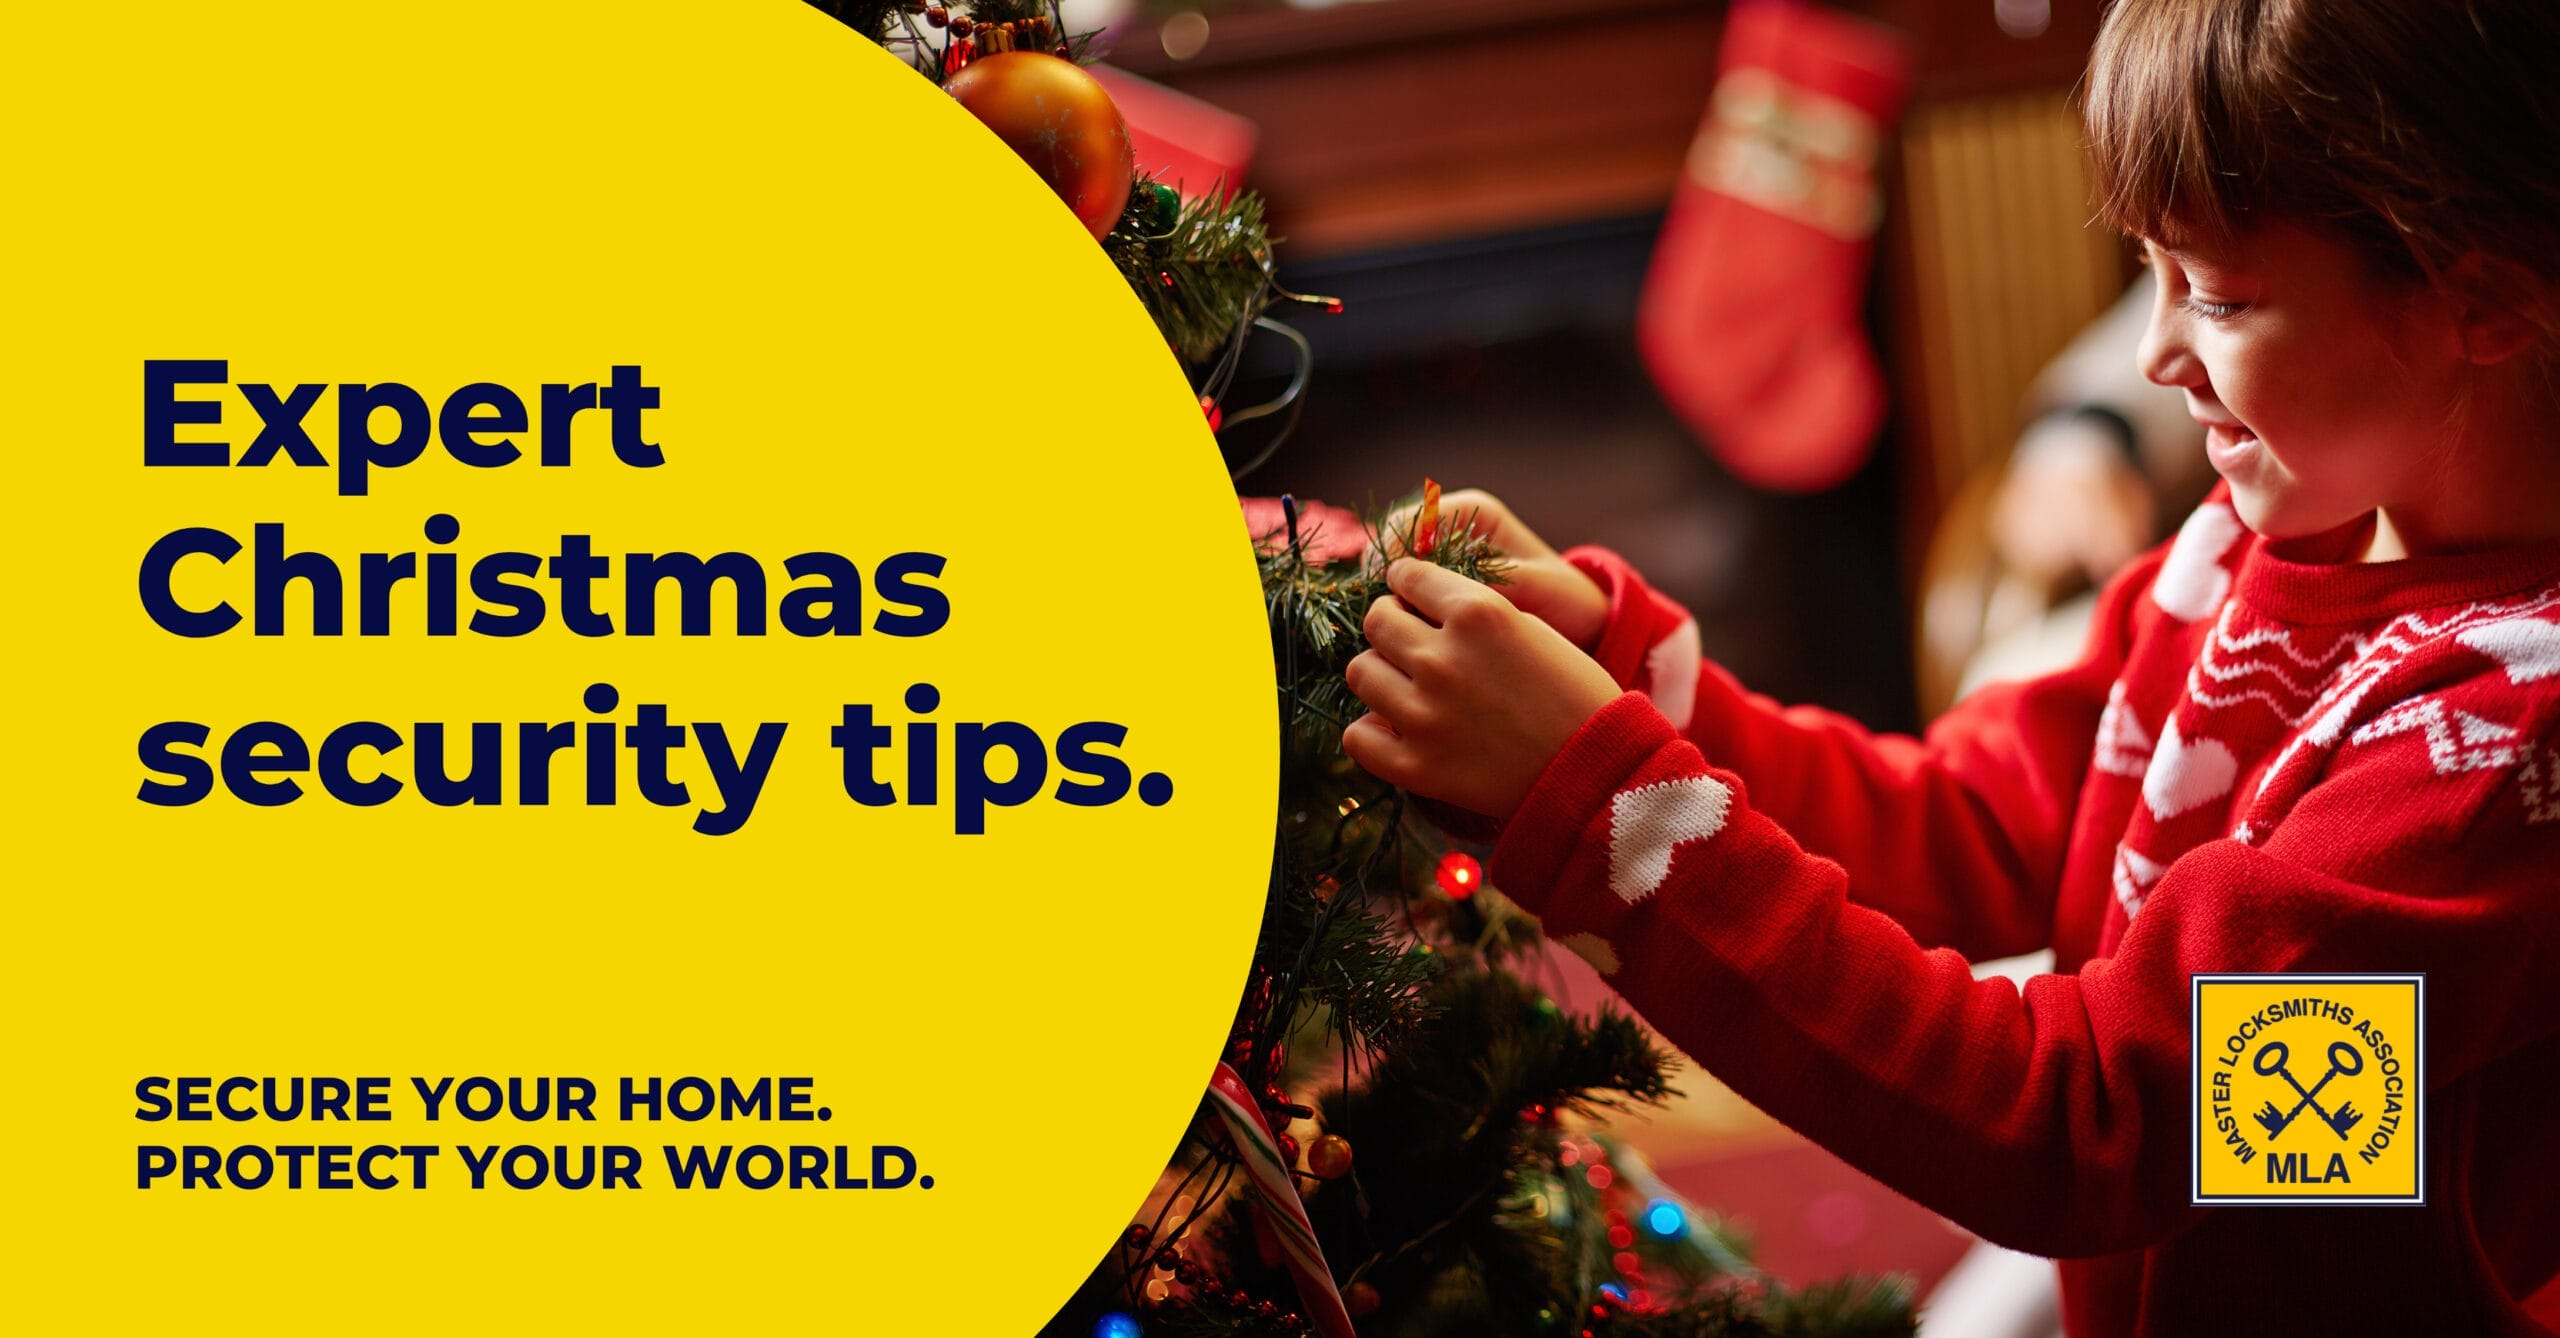 6 Expert Tips to Help Secure Your Home This Christmas